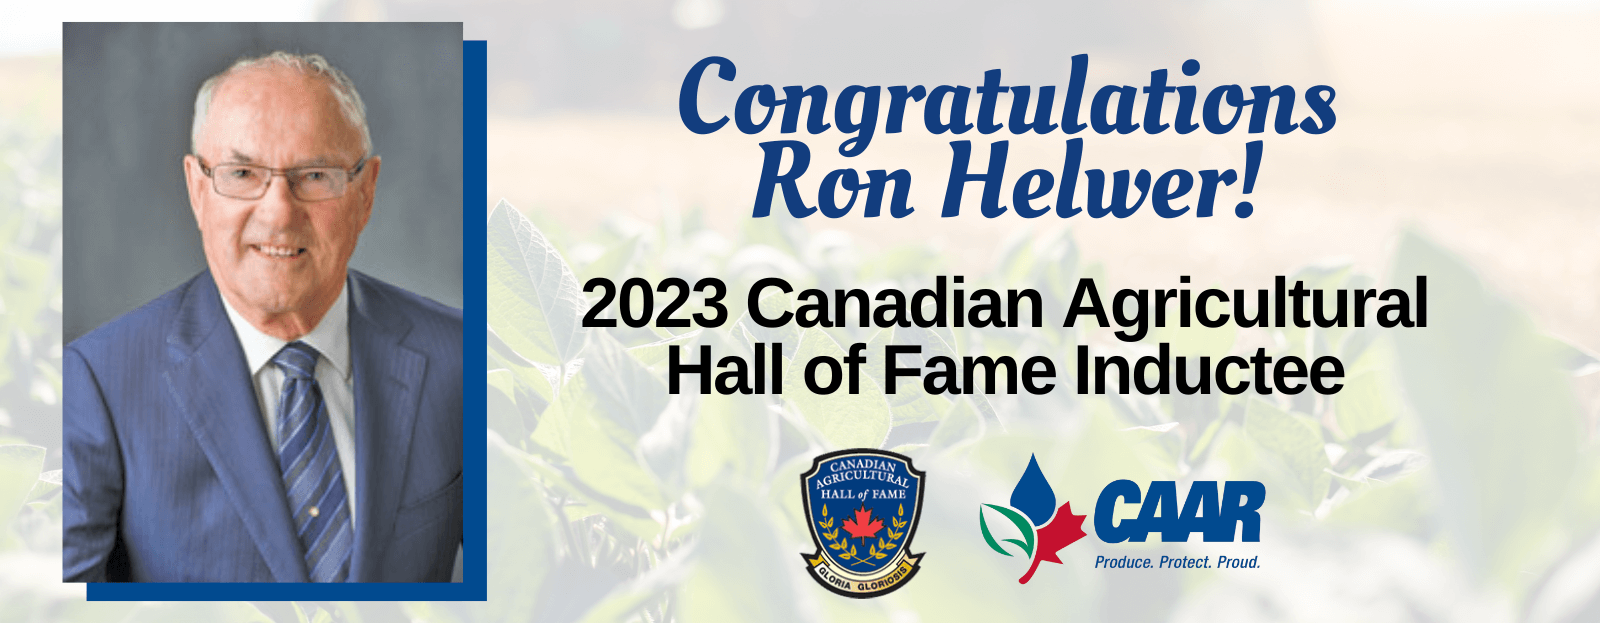 Ron Helwer announced as an inductee into the Canadian Agricultural Hall of Fame